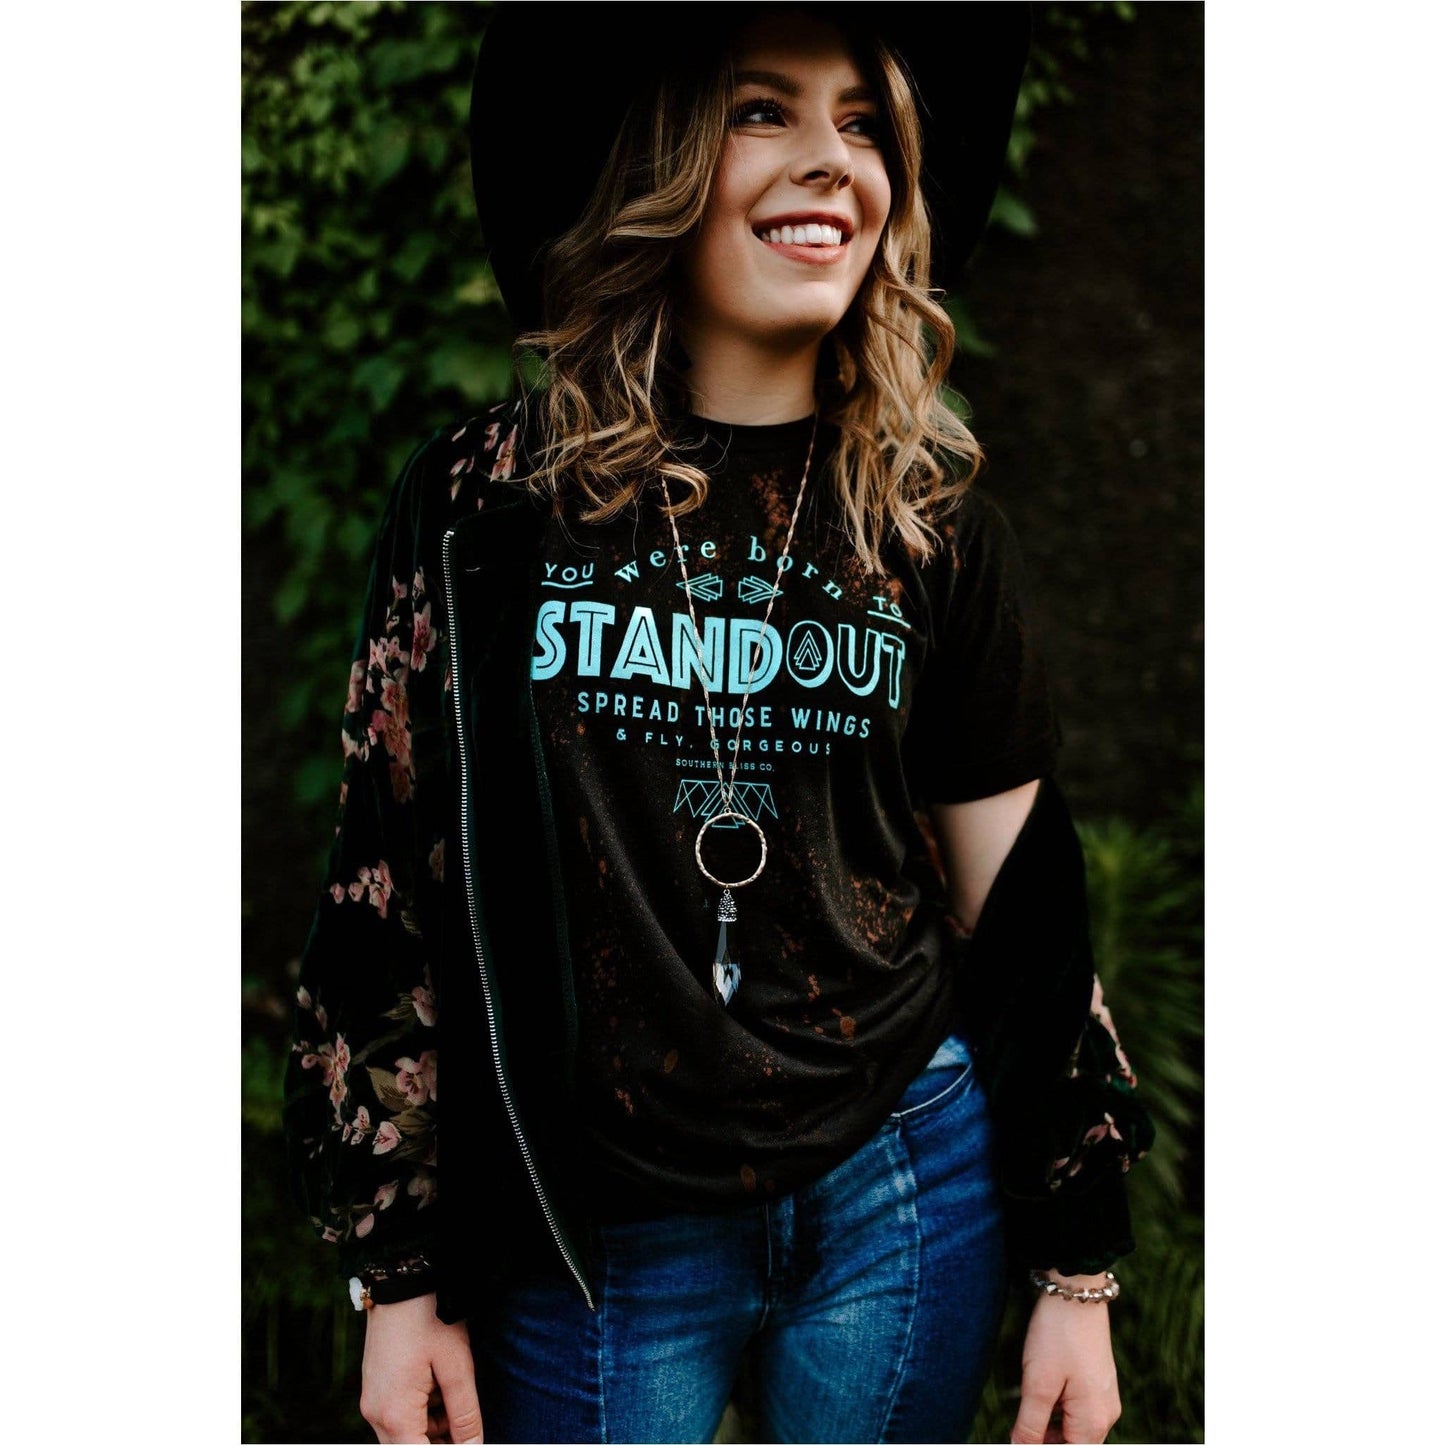 Born to Standout Tee